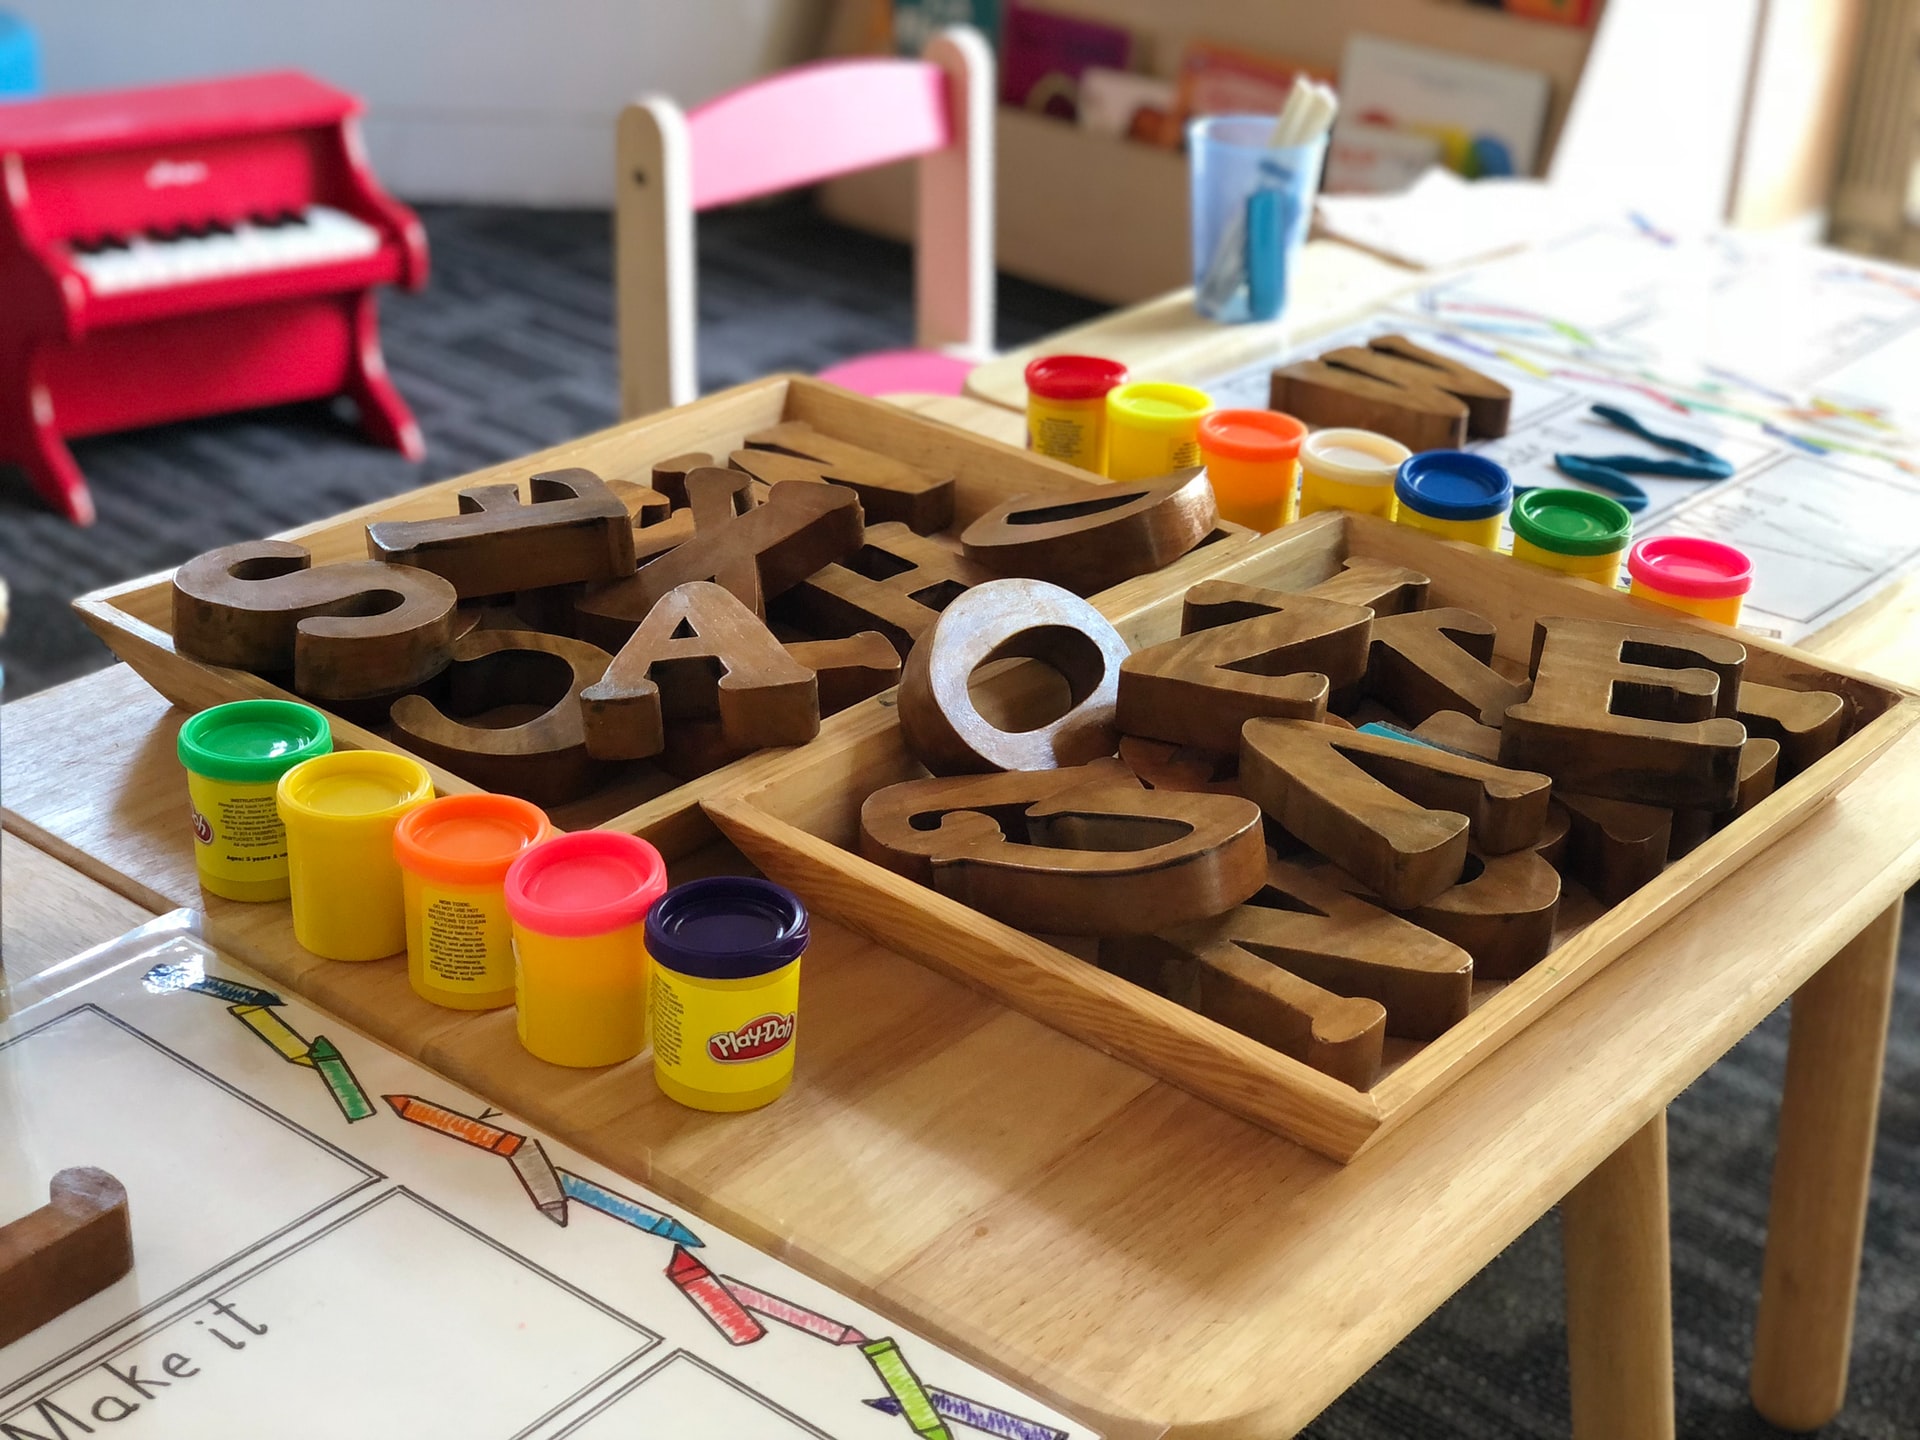 Acitivity table in children's daycare